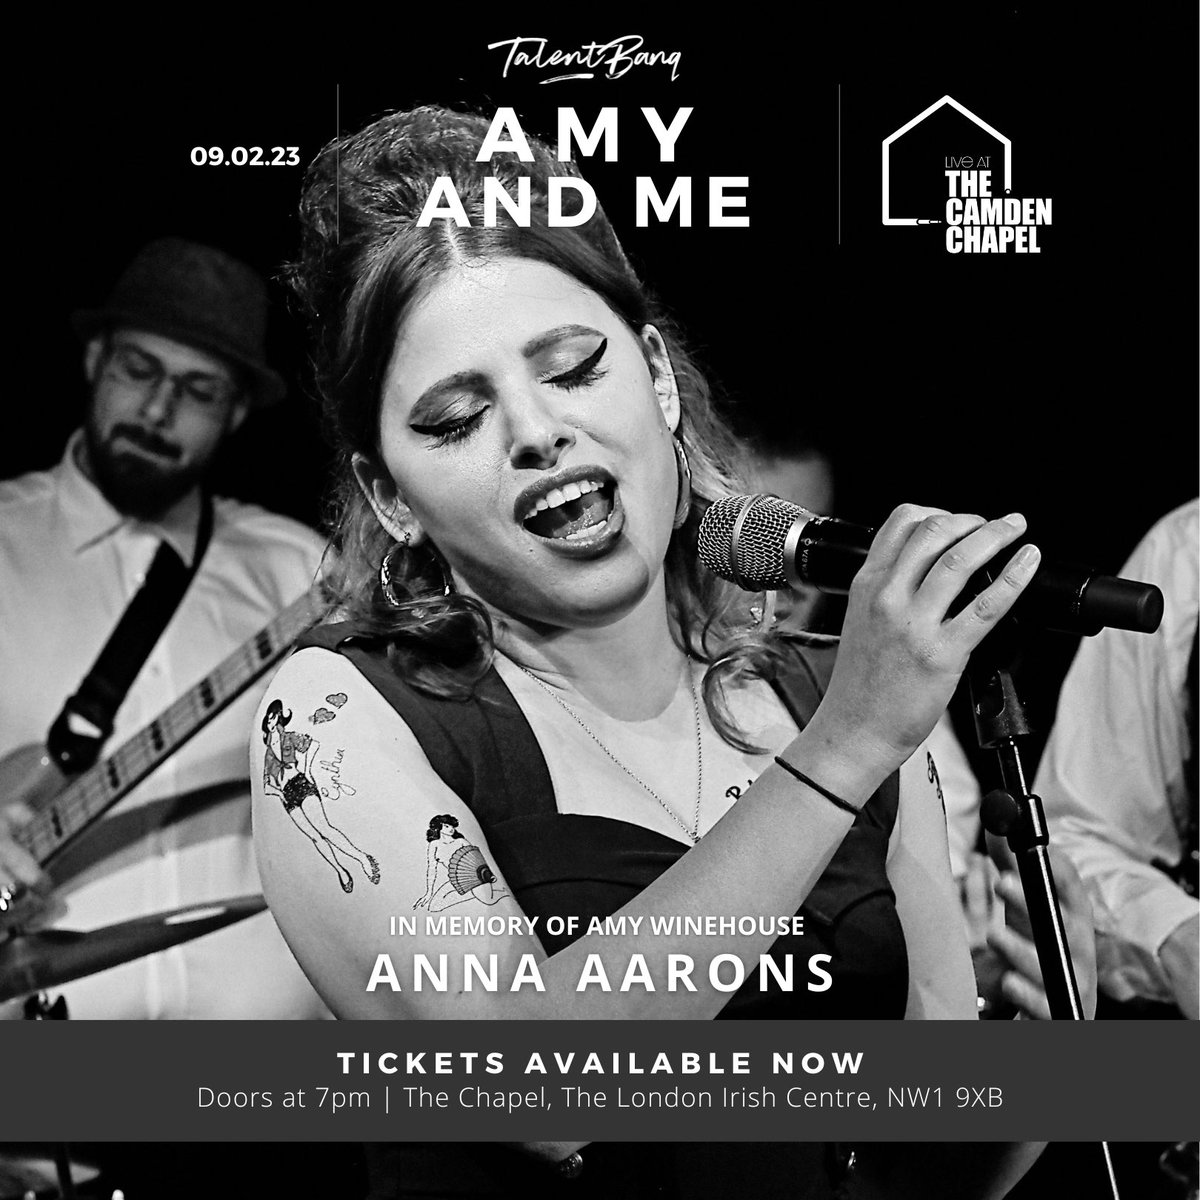 🌟TWO WEEKS 🌟 until my very special show with @talentbanq looking into the influences behind Amy’s music and her influences on mine. Can’t wait for this! 📆 9th Feb at The Camden Chapel, Some tickets still available 🎟 See you there 🤩 #amywinehouse tickettailor.com/events/talentb…